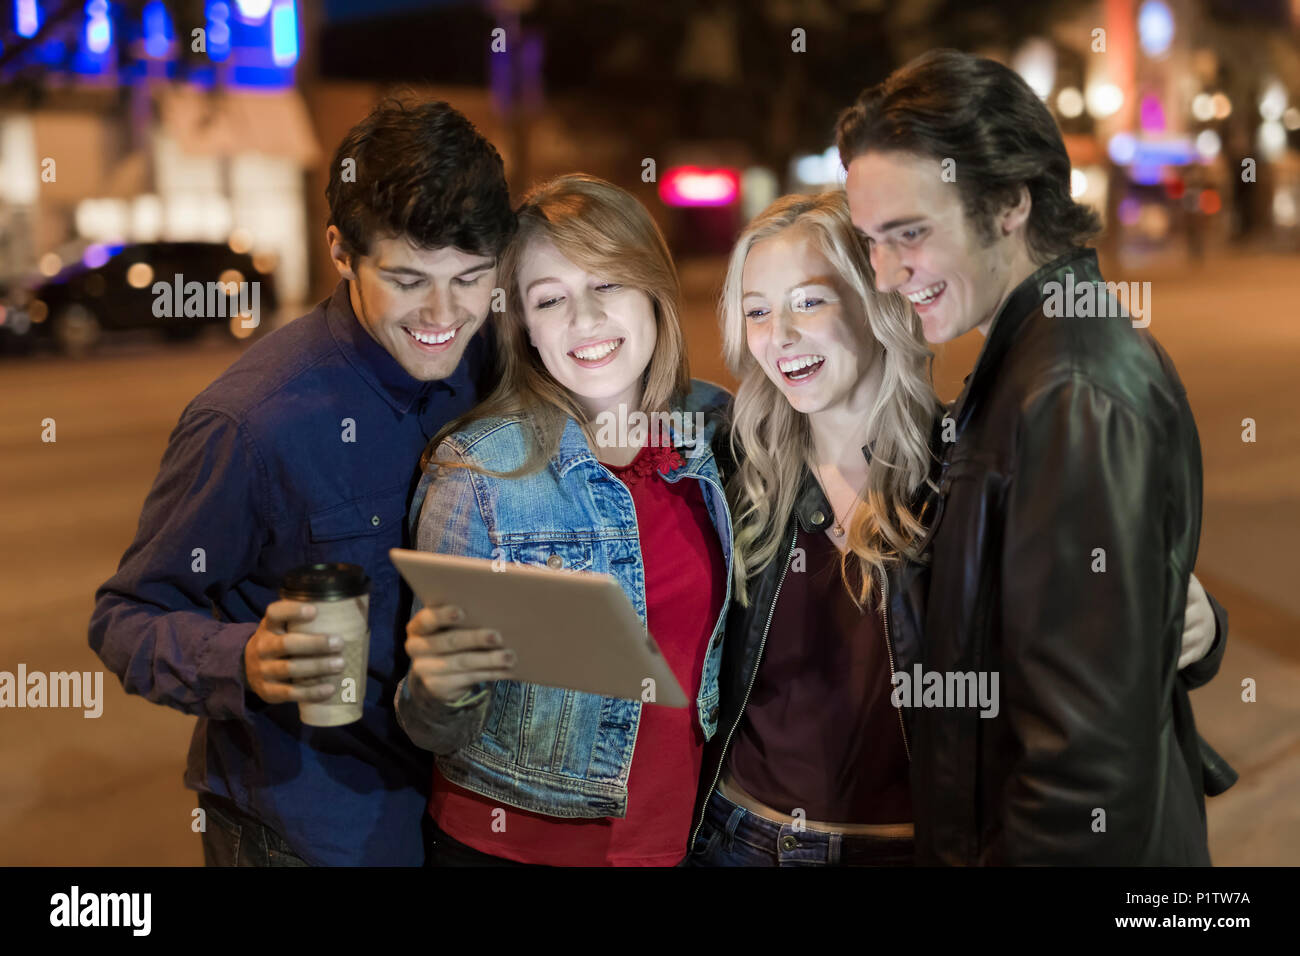 A group of four friends huddle together on a sidewalk looking at a tablet as the glow from the screen lights up their faces; Edmonton, Alberta, Canada Stock Photo